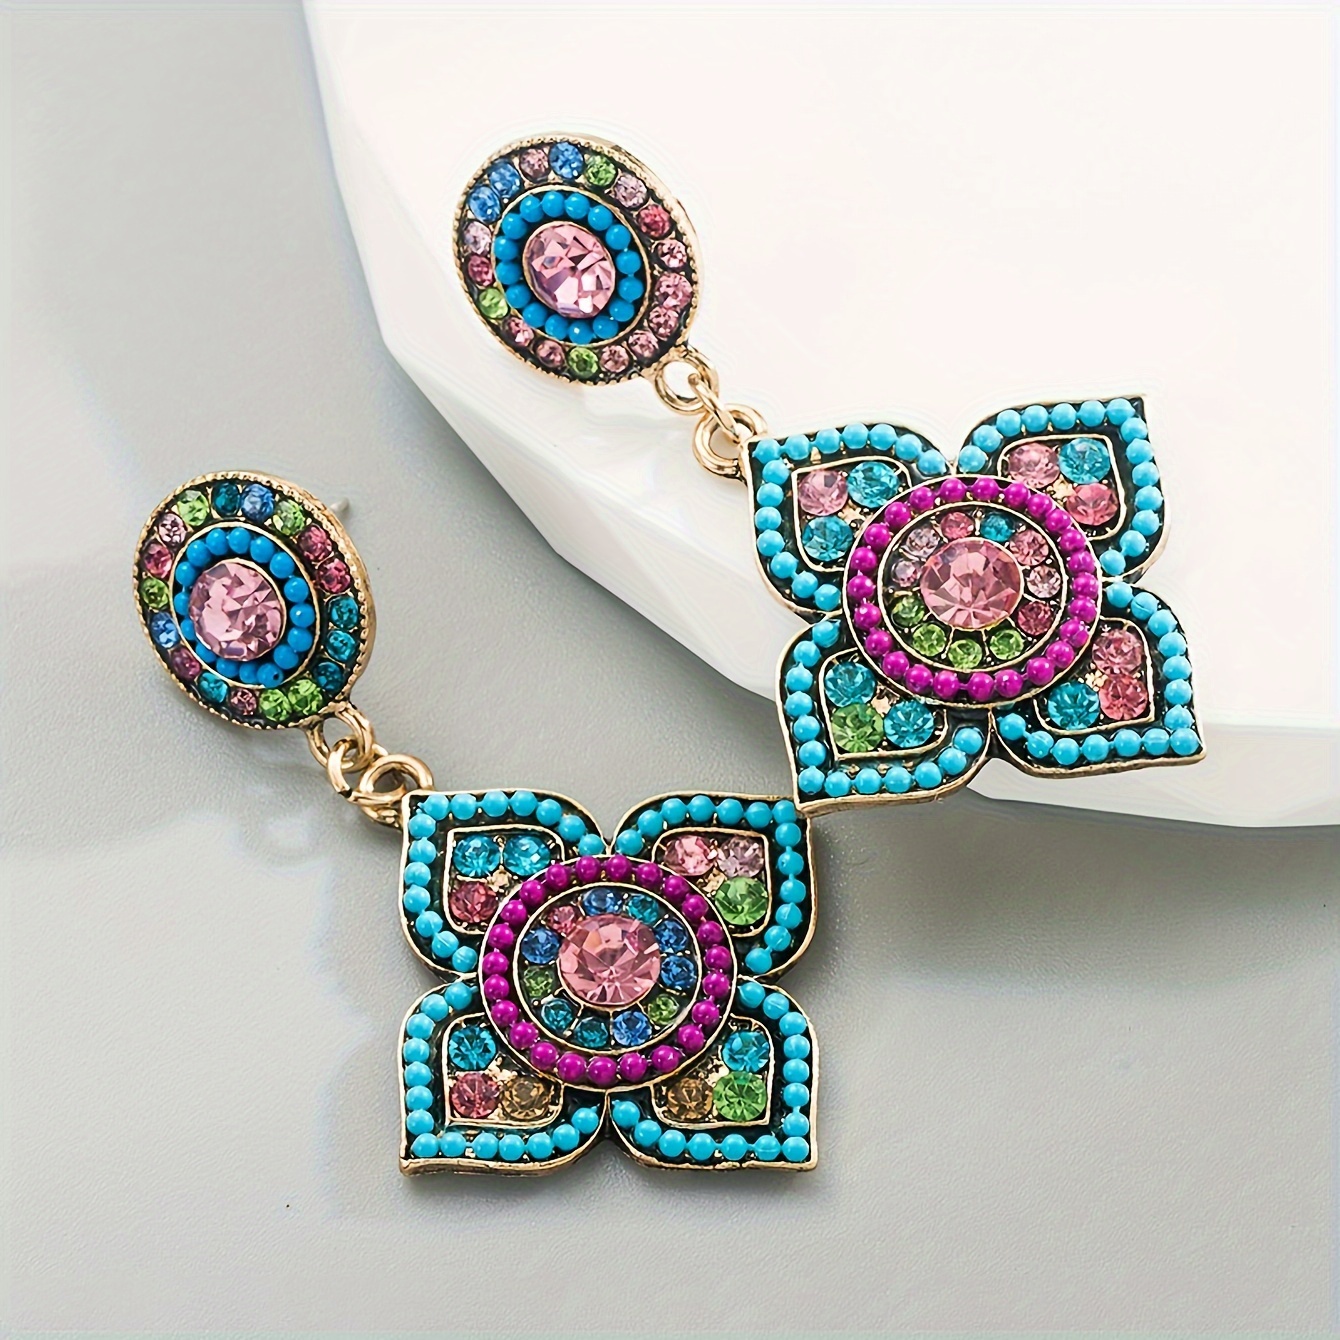 

Creative Colorful Flower Design Dangle Earrings Bohemian Ethnic Style Personalized Women's Career Party Earrings, Perfect Holiday Gift For Beautiful Women